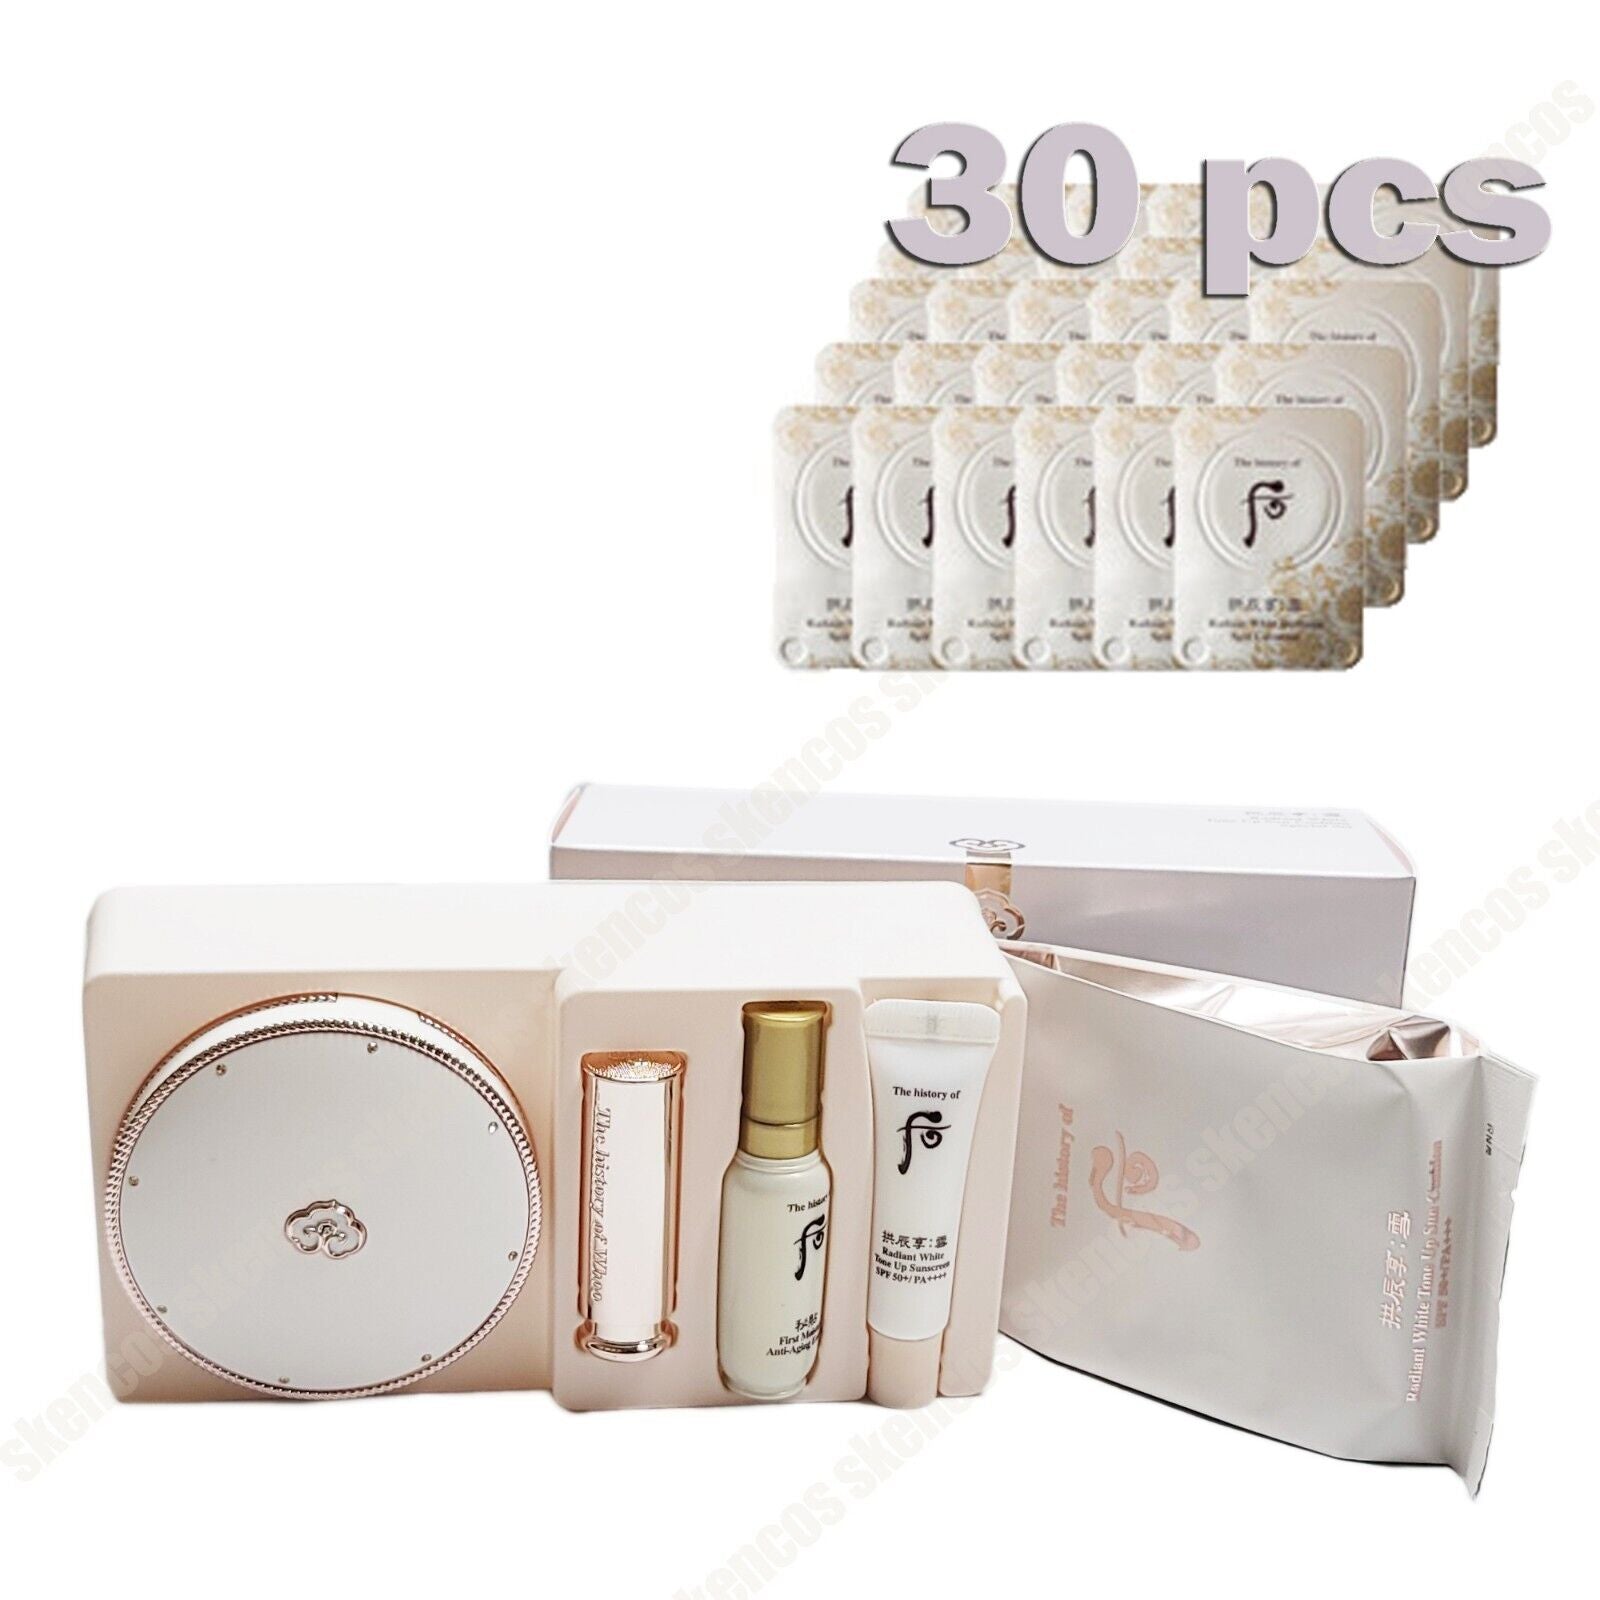 The history of Whoo Seol Radiant White Tone Up Sun Cushion+Refill Set+Corrector